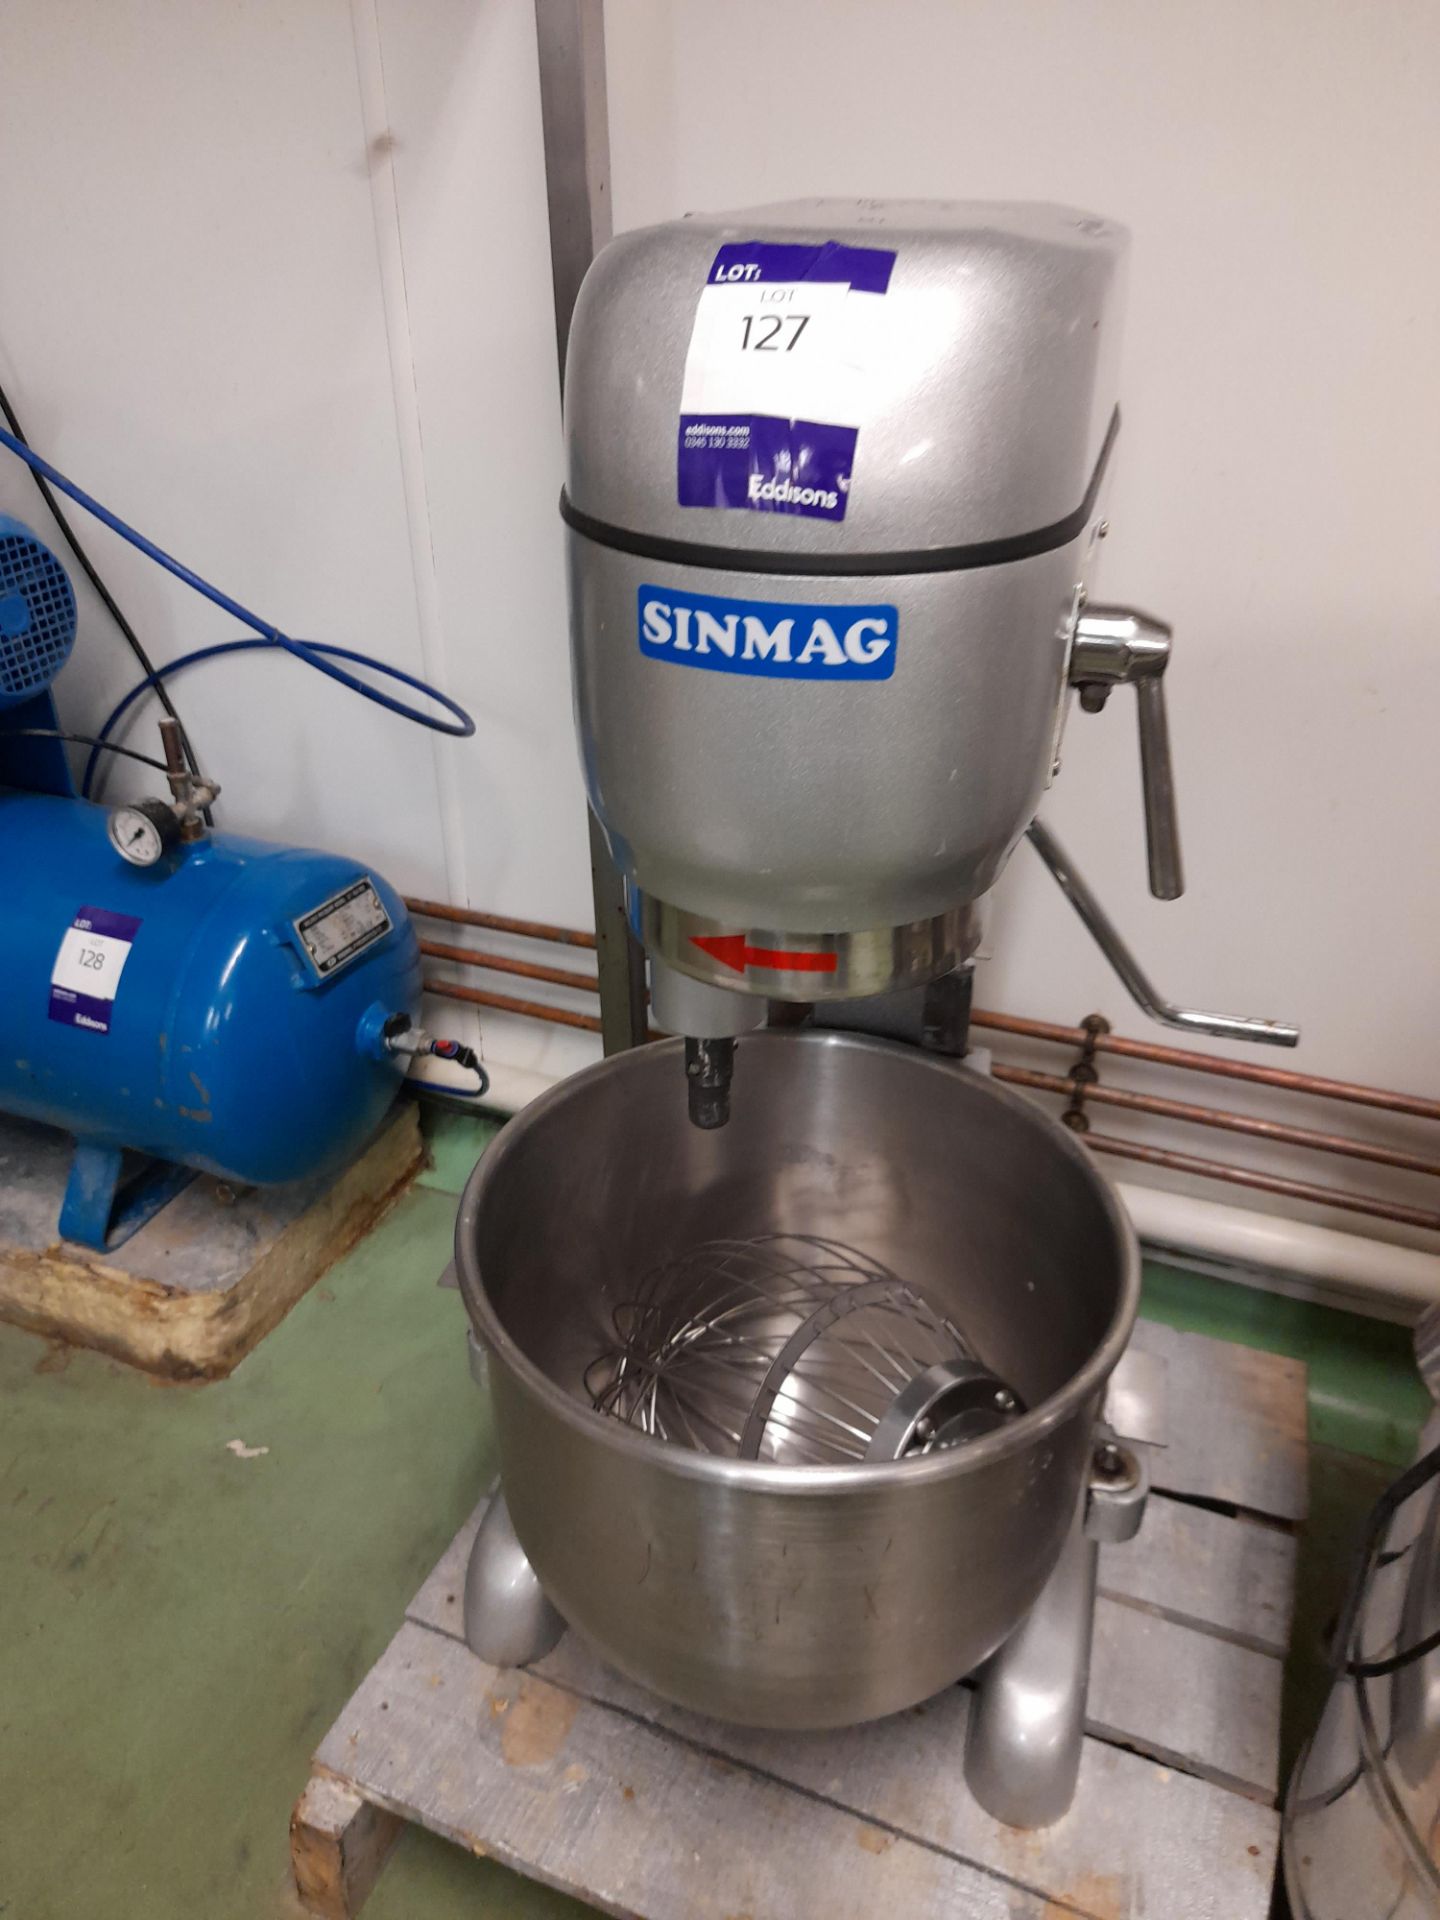 Sinmag SM201 bowl mixer, year March 2017, with bowl and balloon whisk – Located on 1st floor